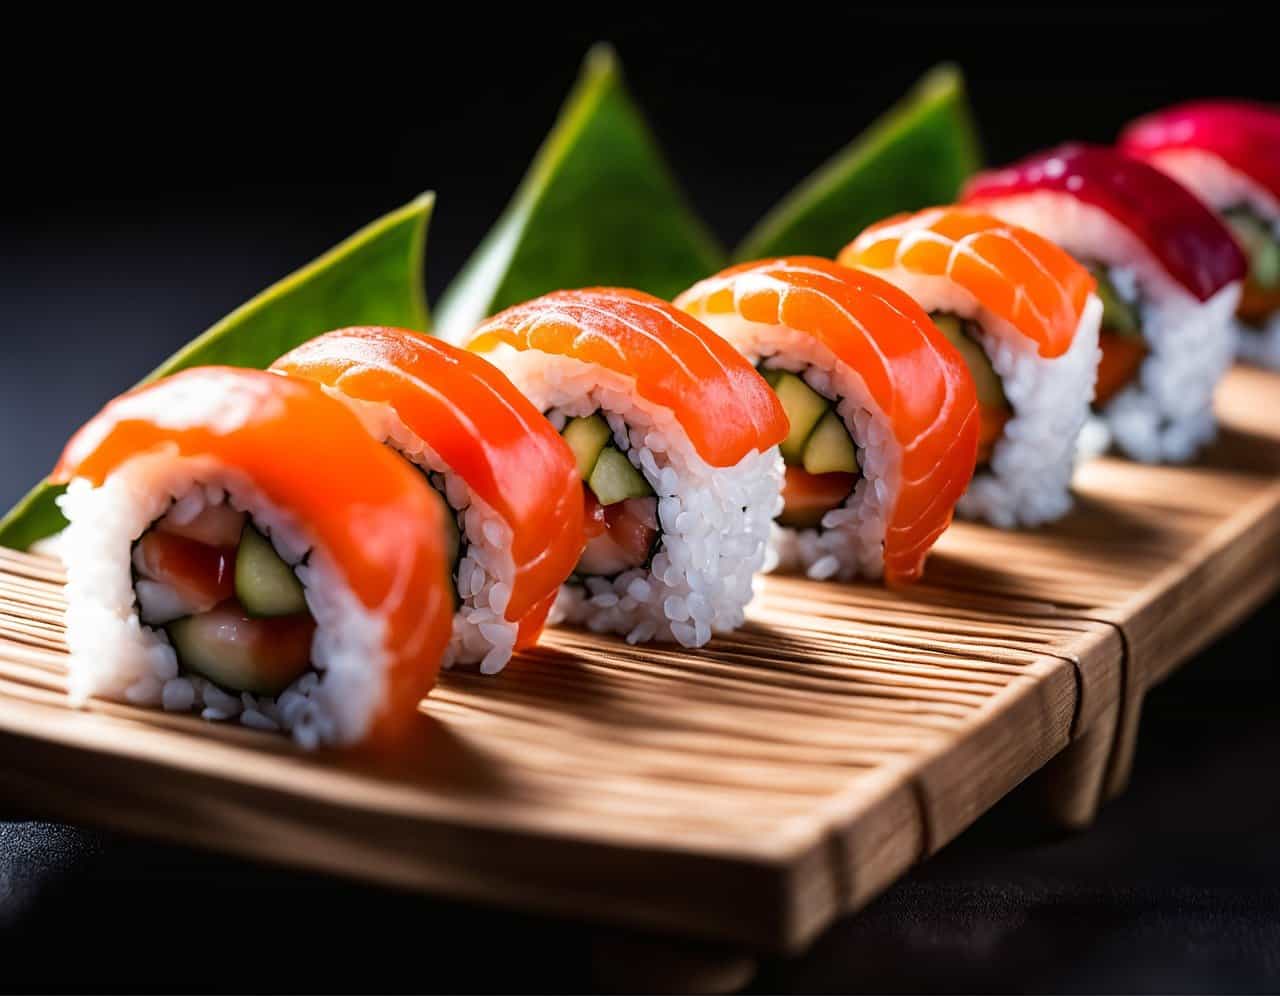 Top places to go eat Sushi in London